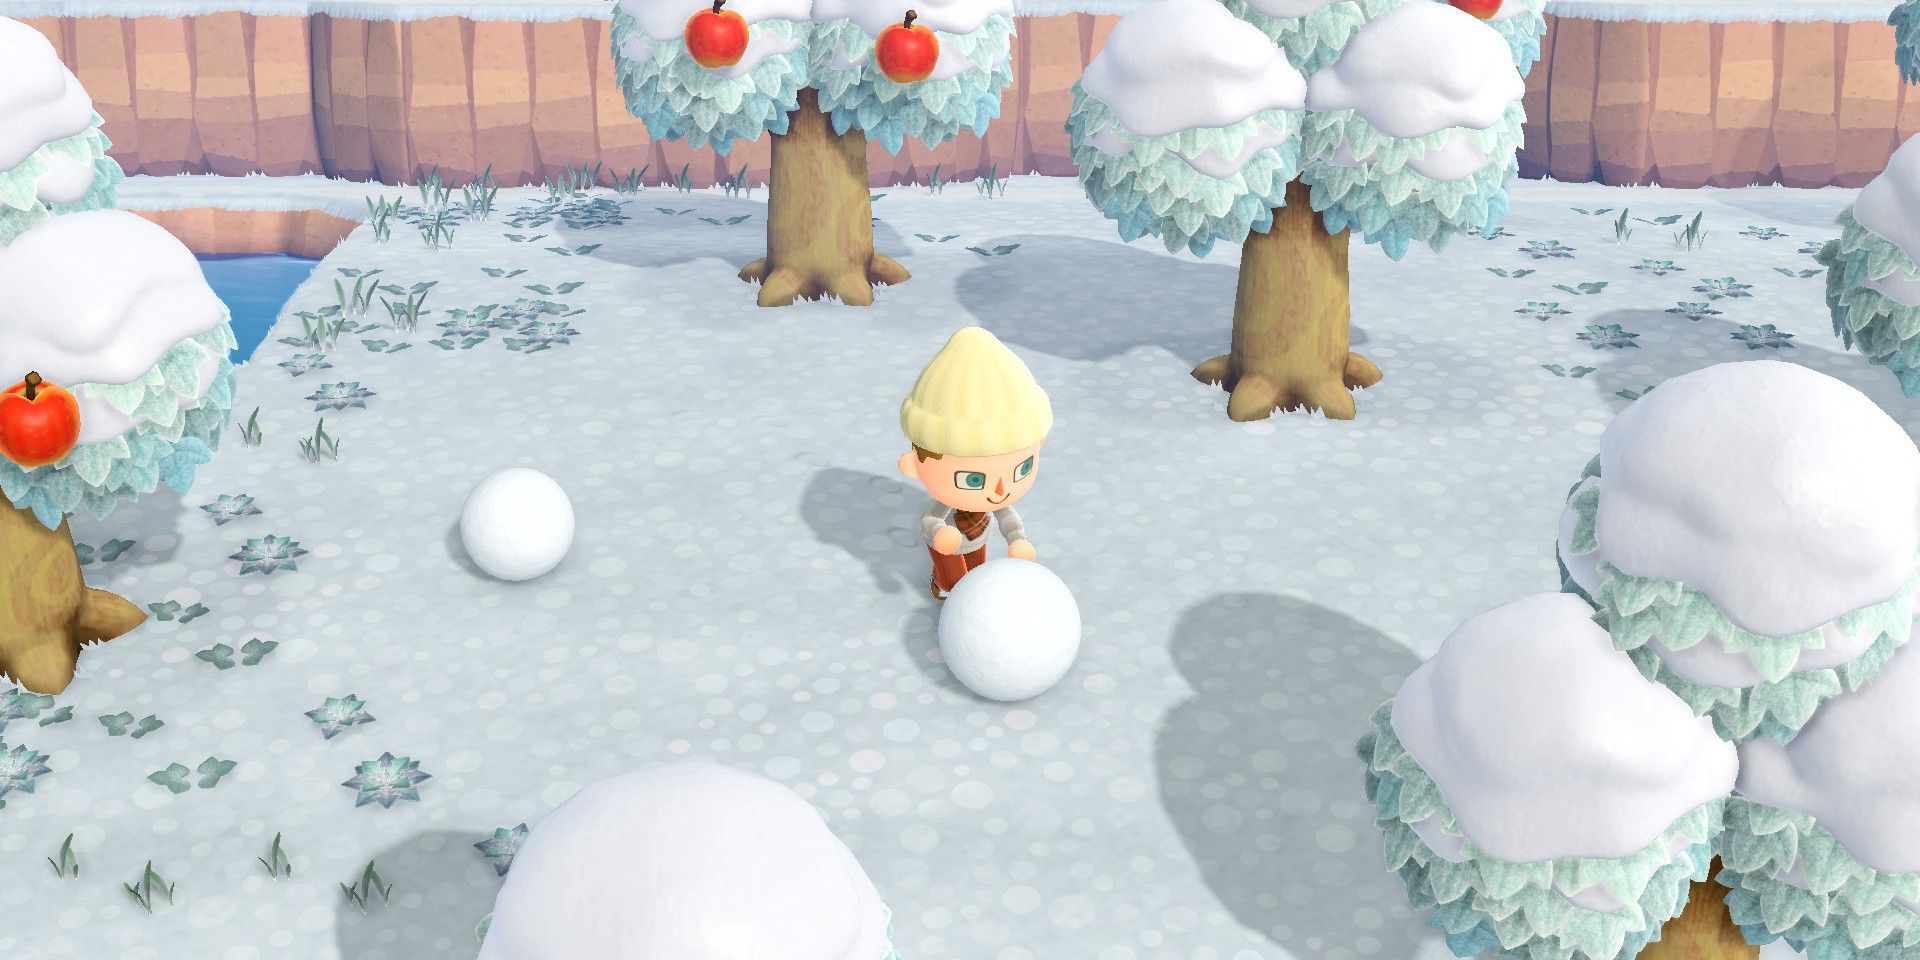 animal crossing new horizons villager rolling snowball for snow boy in winter snow